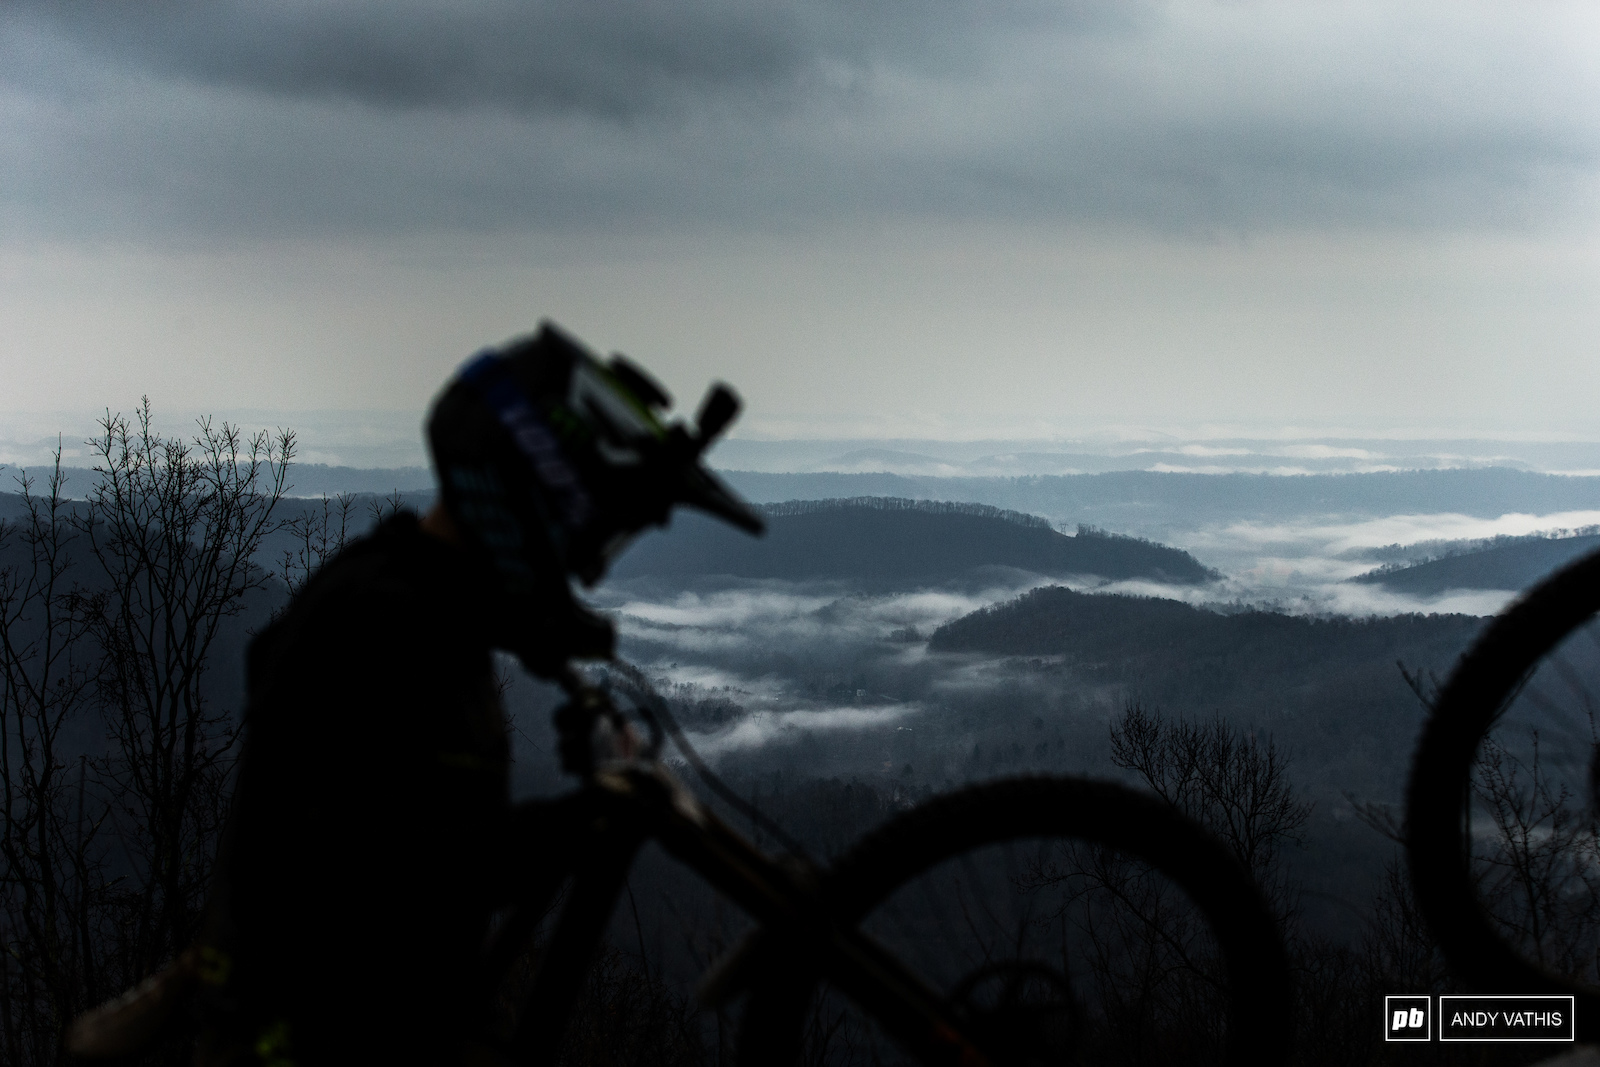 Fog filled the valleys this morning while riders made their way up to the plate. It had stopped drizzling but only for a moment.